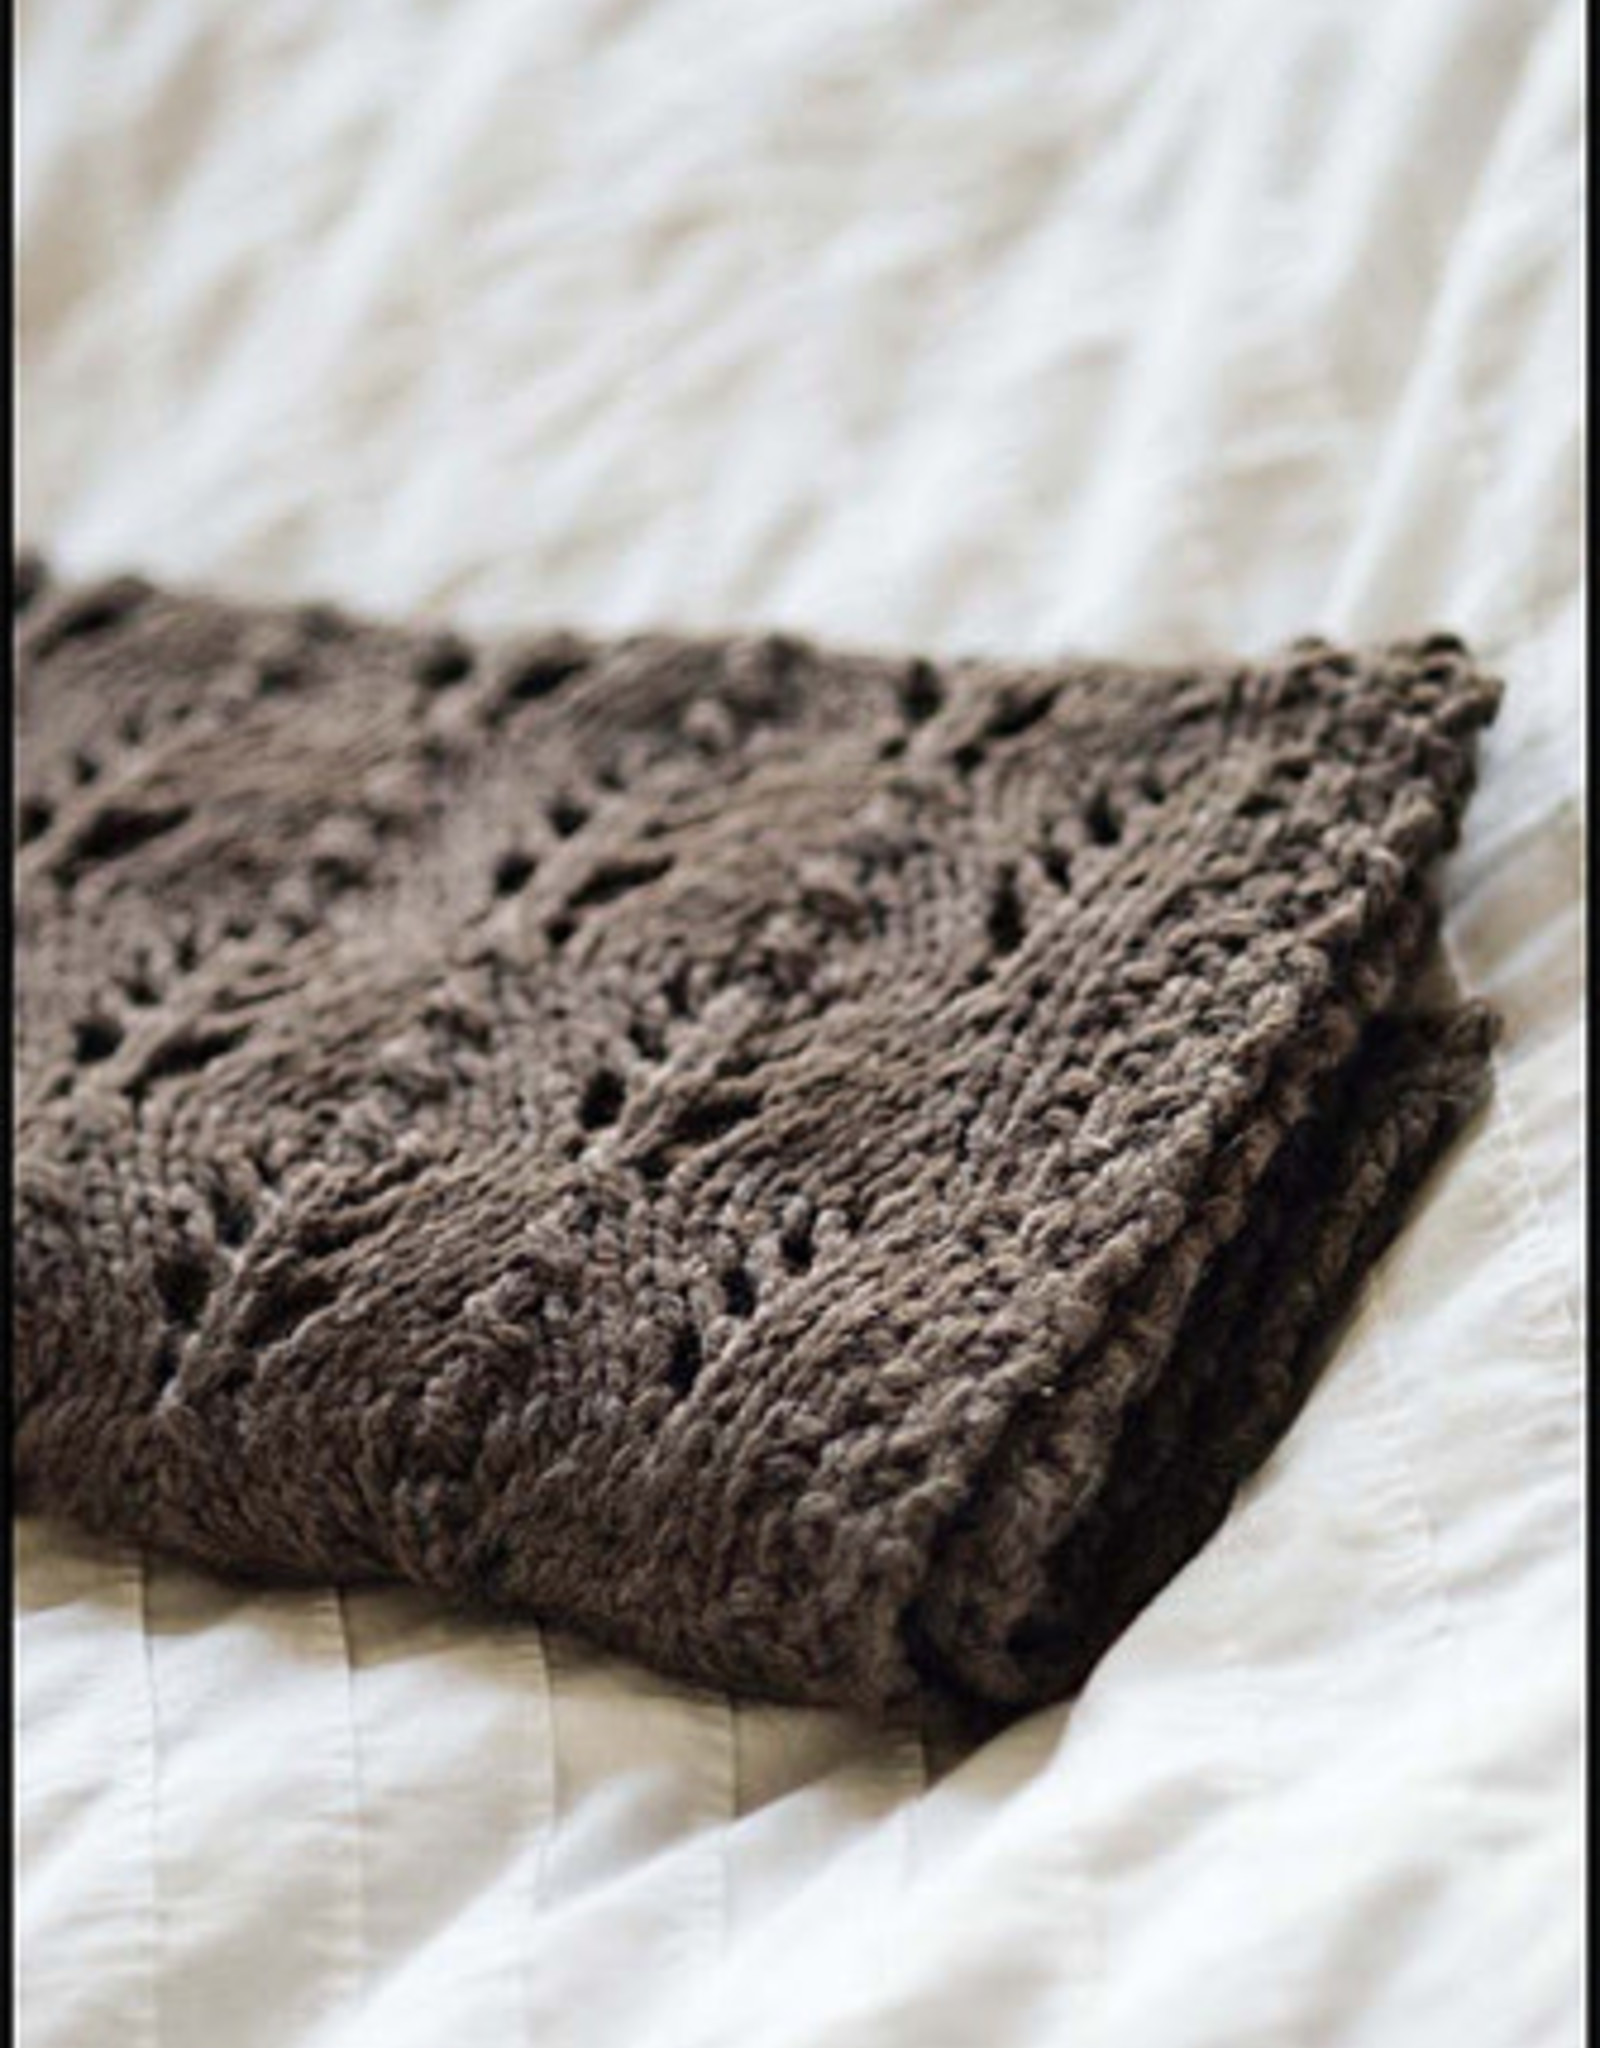 Intro to Lace - Blanket: SA Feb 18 & 25, 12-2 pm